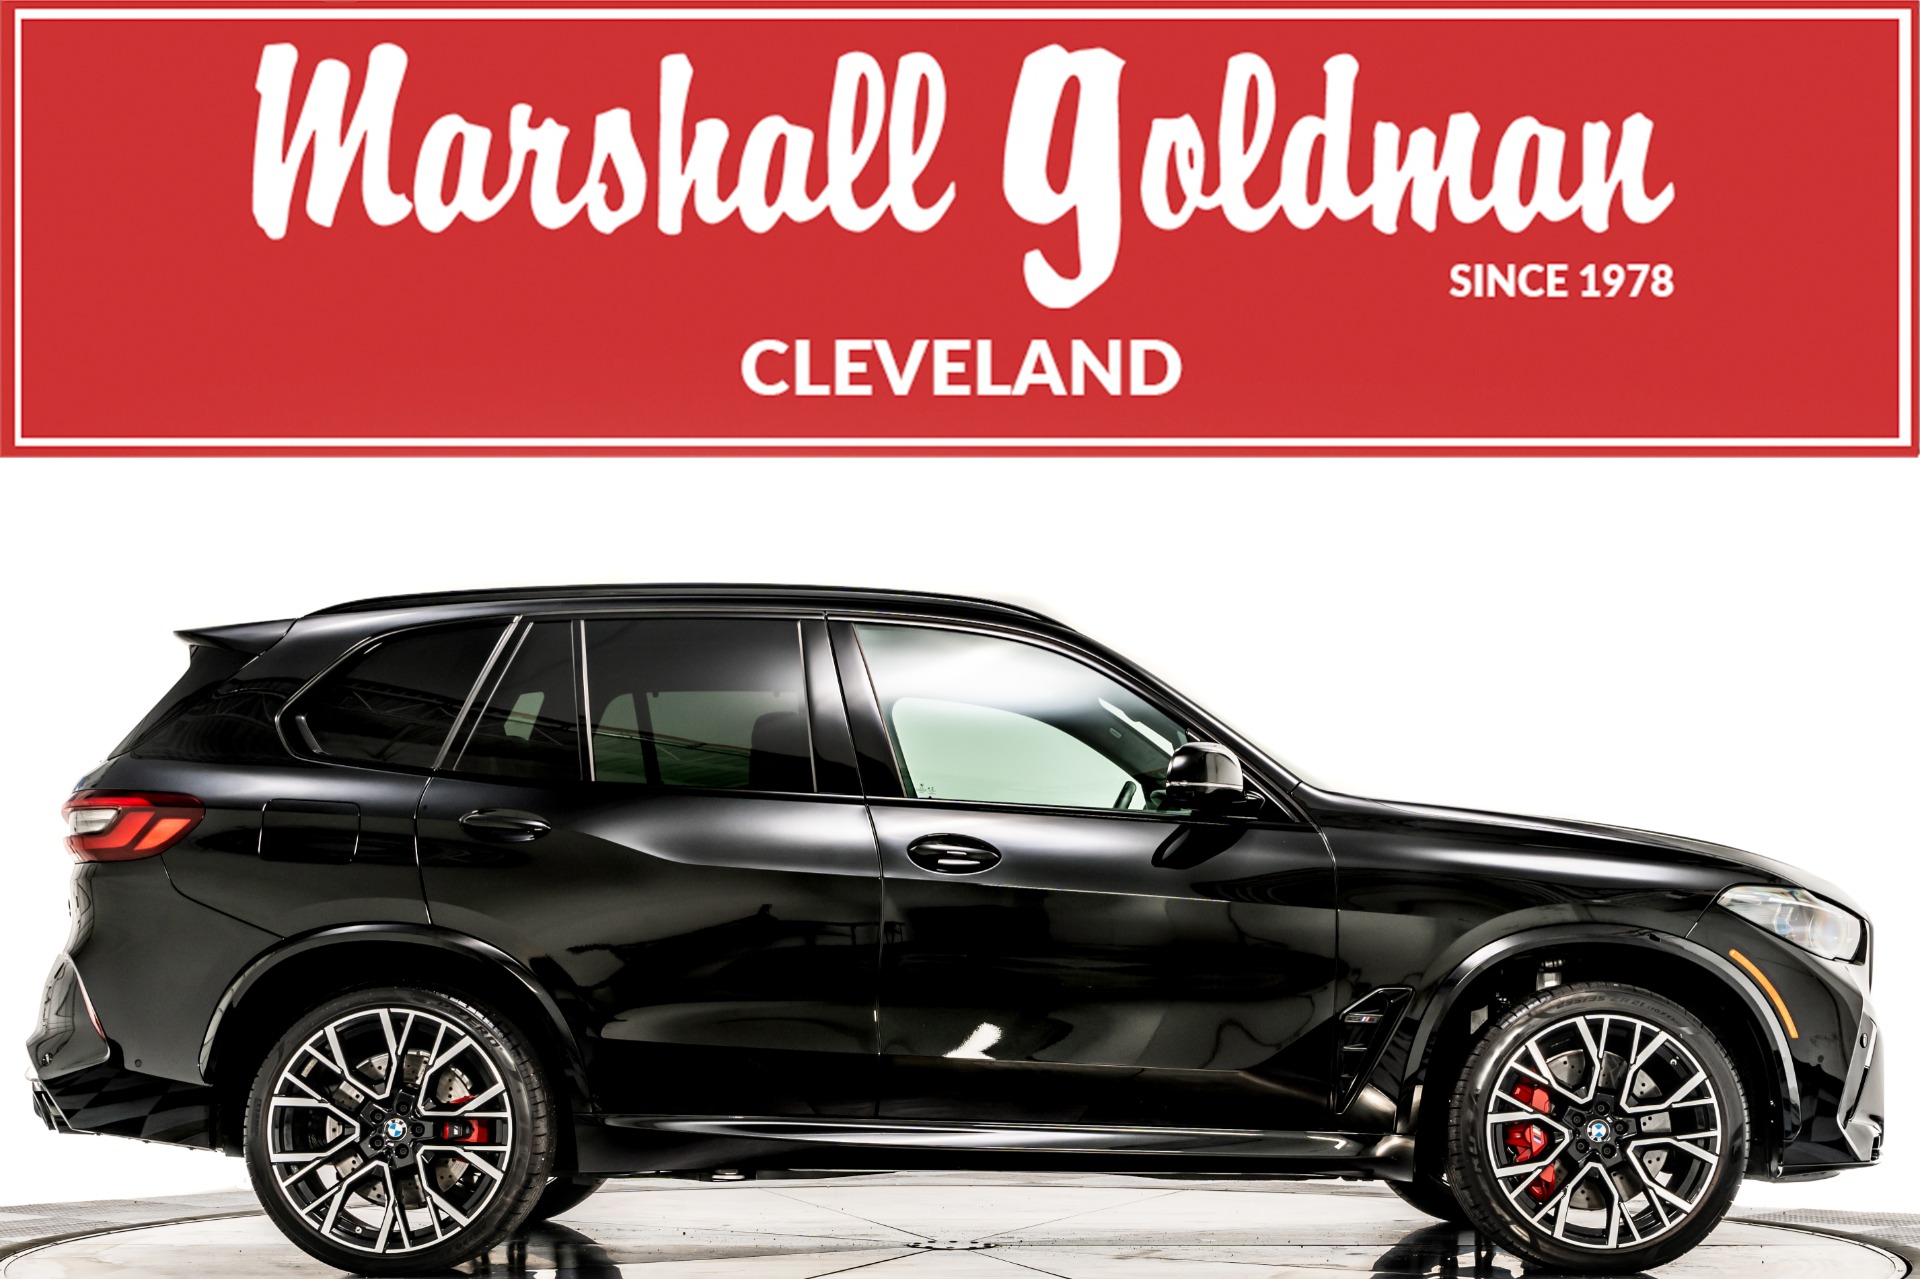 Used 2022 BMW X5M Competition For Sale ($112,900) | Marshall Goldman  Cleveland Stock #W24282